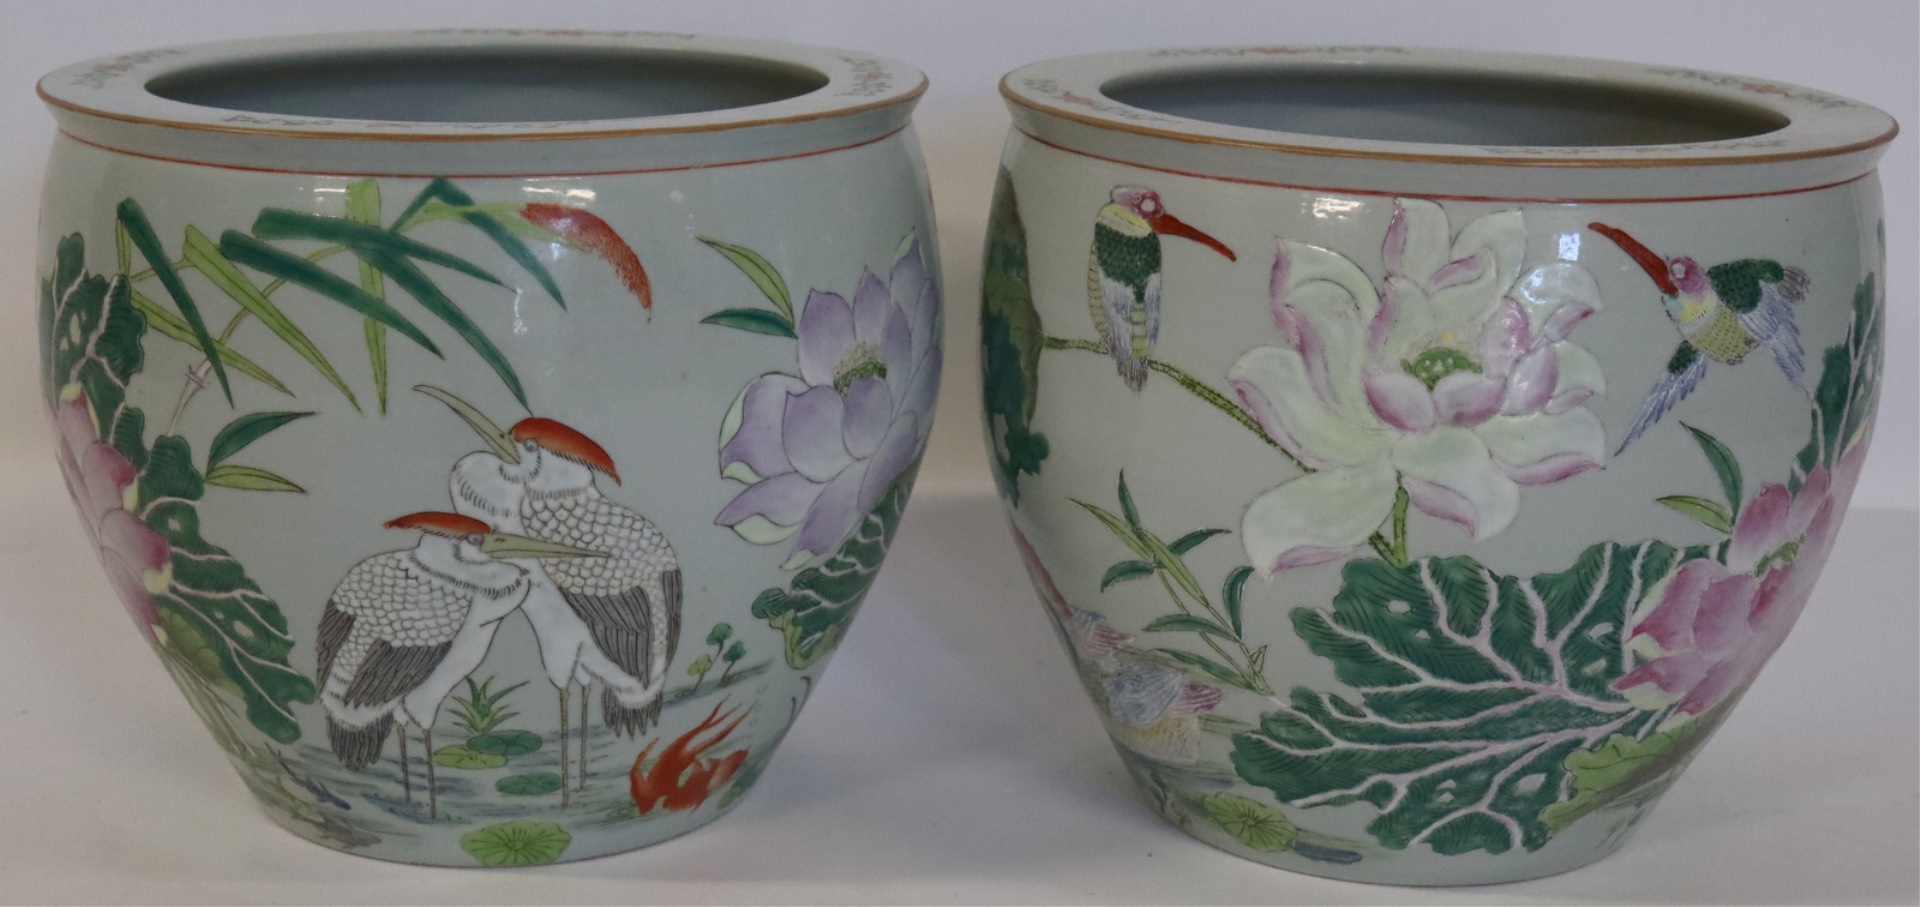 PAIR OF CHINESE ENAMEL DECORATED